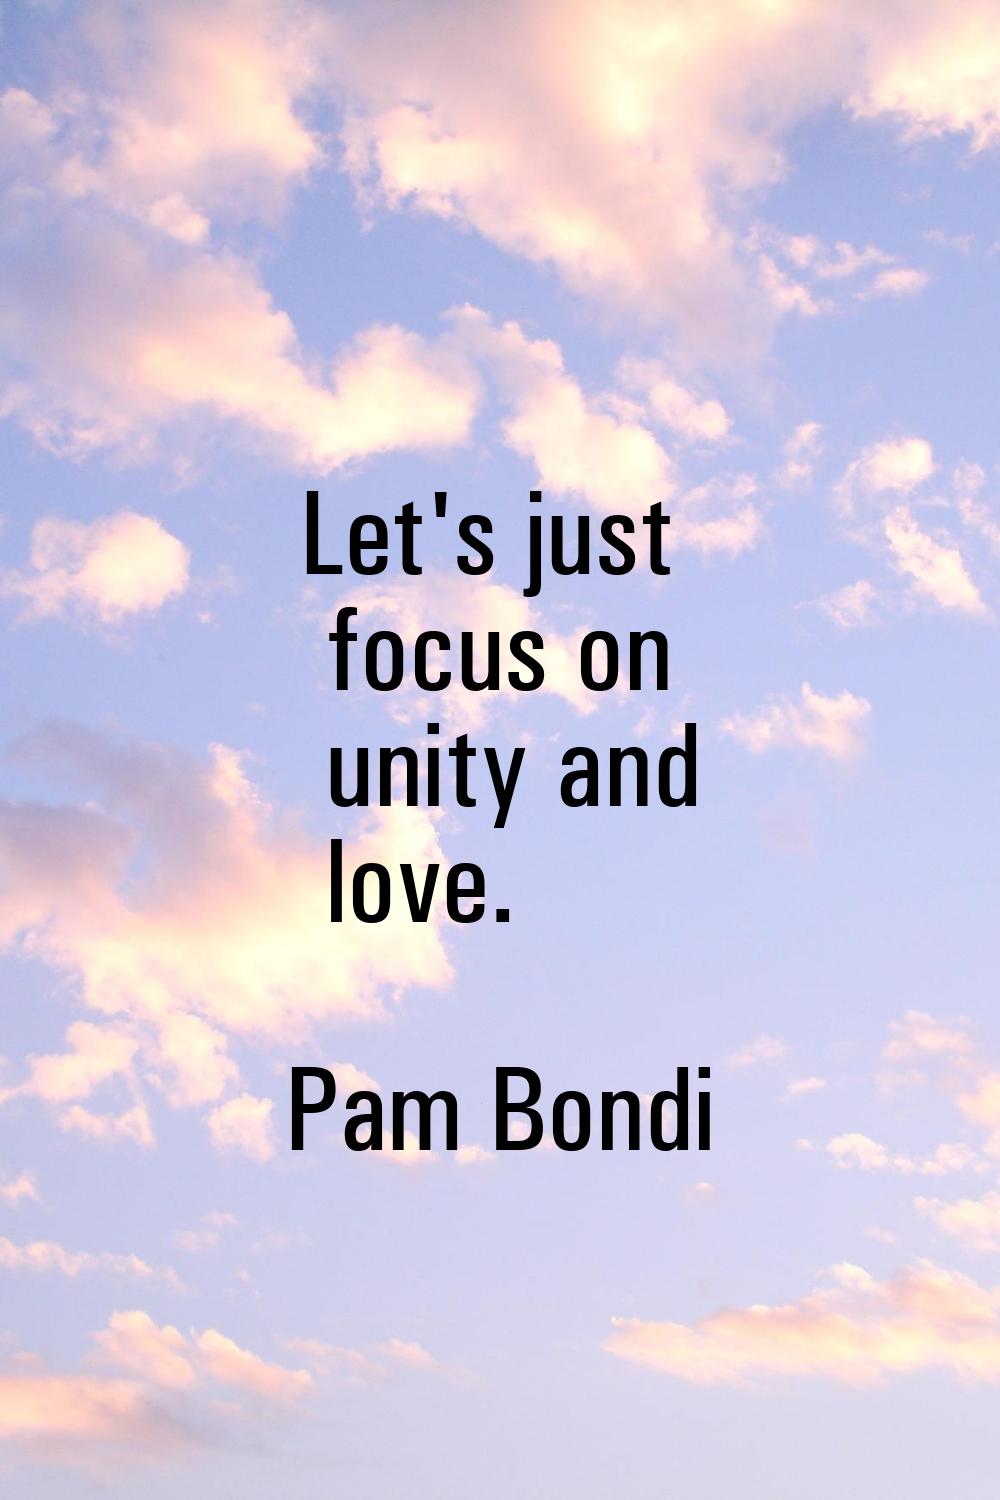 Let's just focus on unity and love.